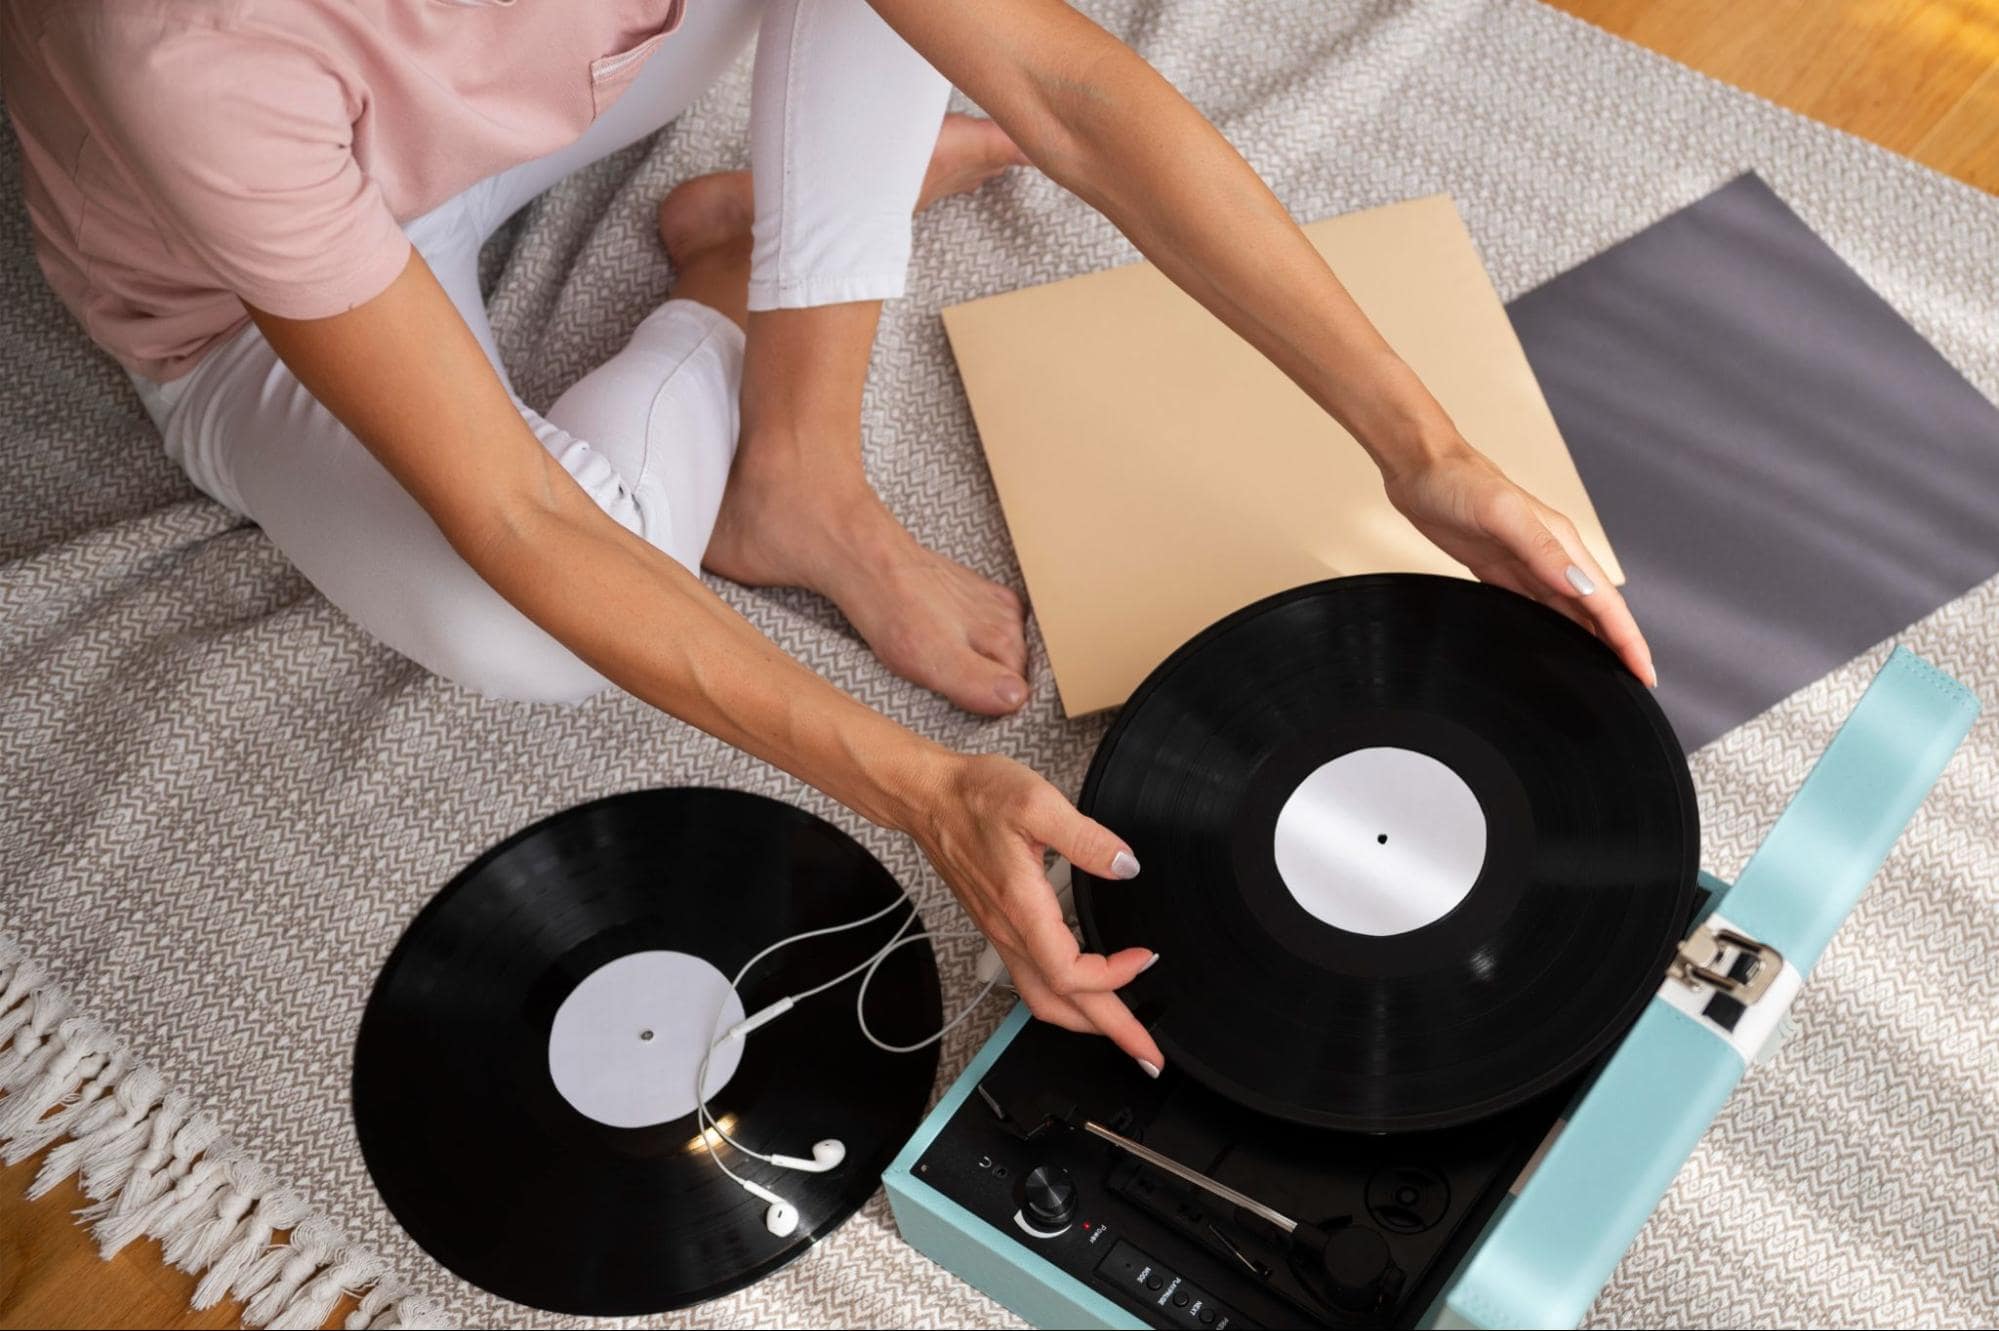 Woman using record player—vintage birthday gift idea for music-loving girlfriend.